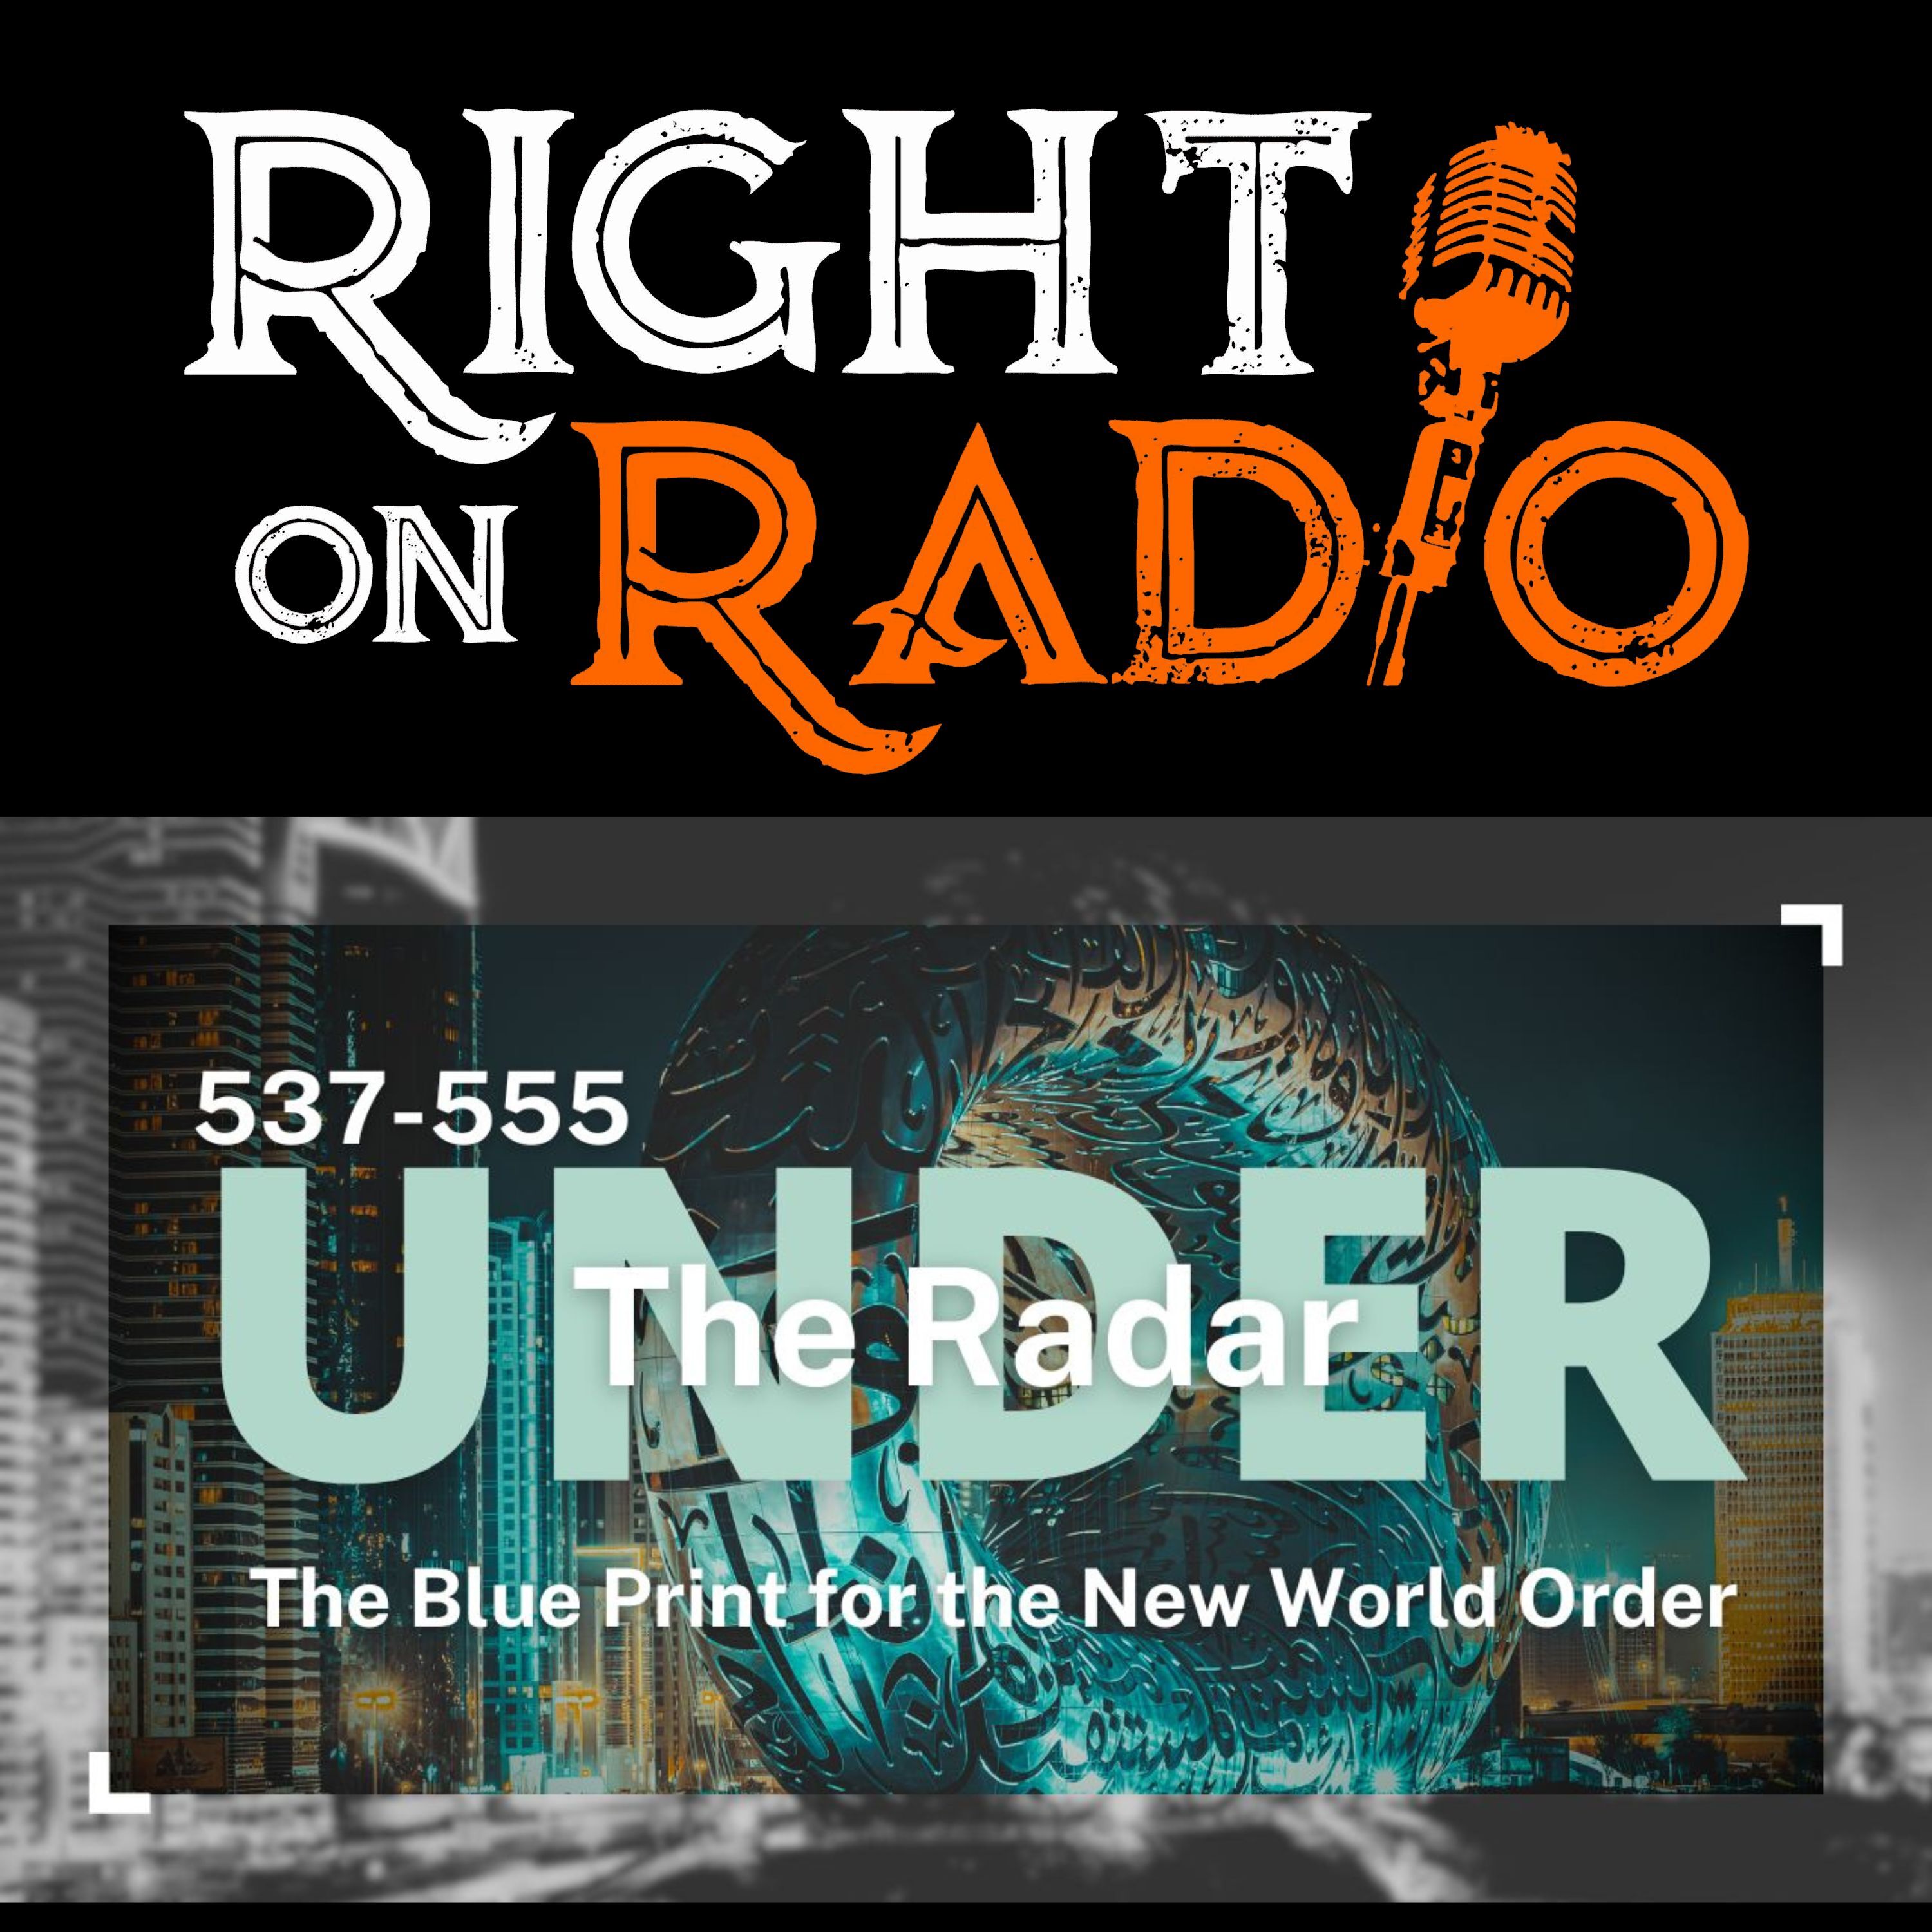 EP.545 Under the Radar. The Blueprint for the New World Order